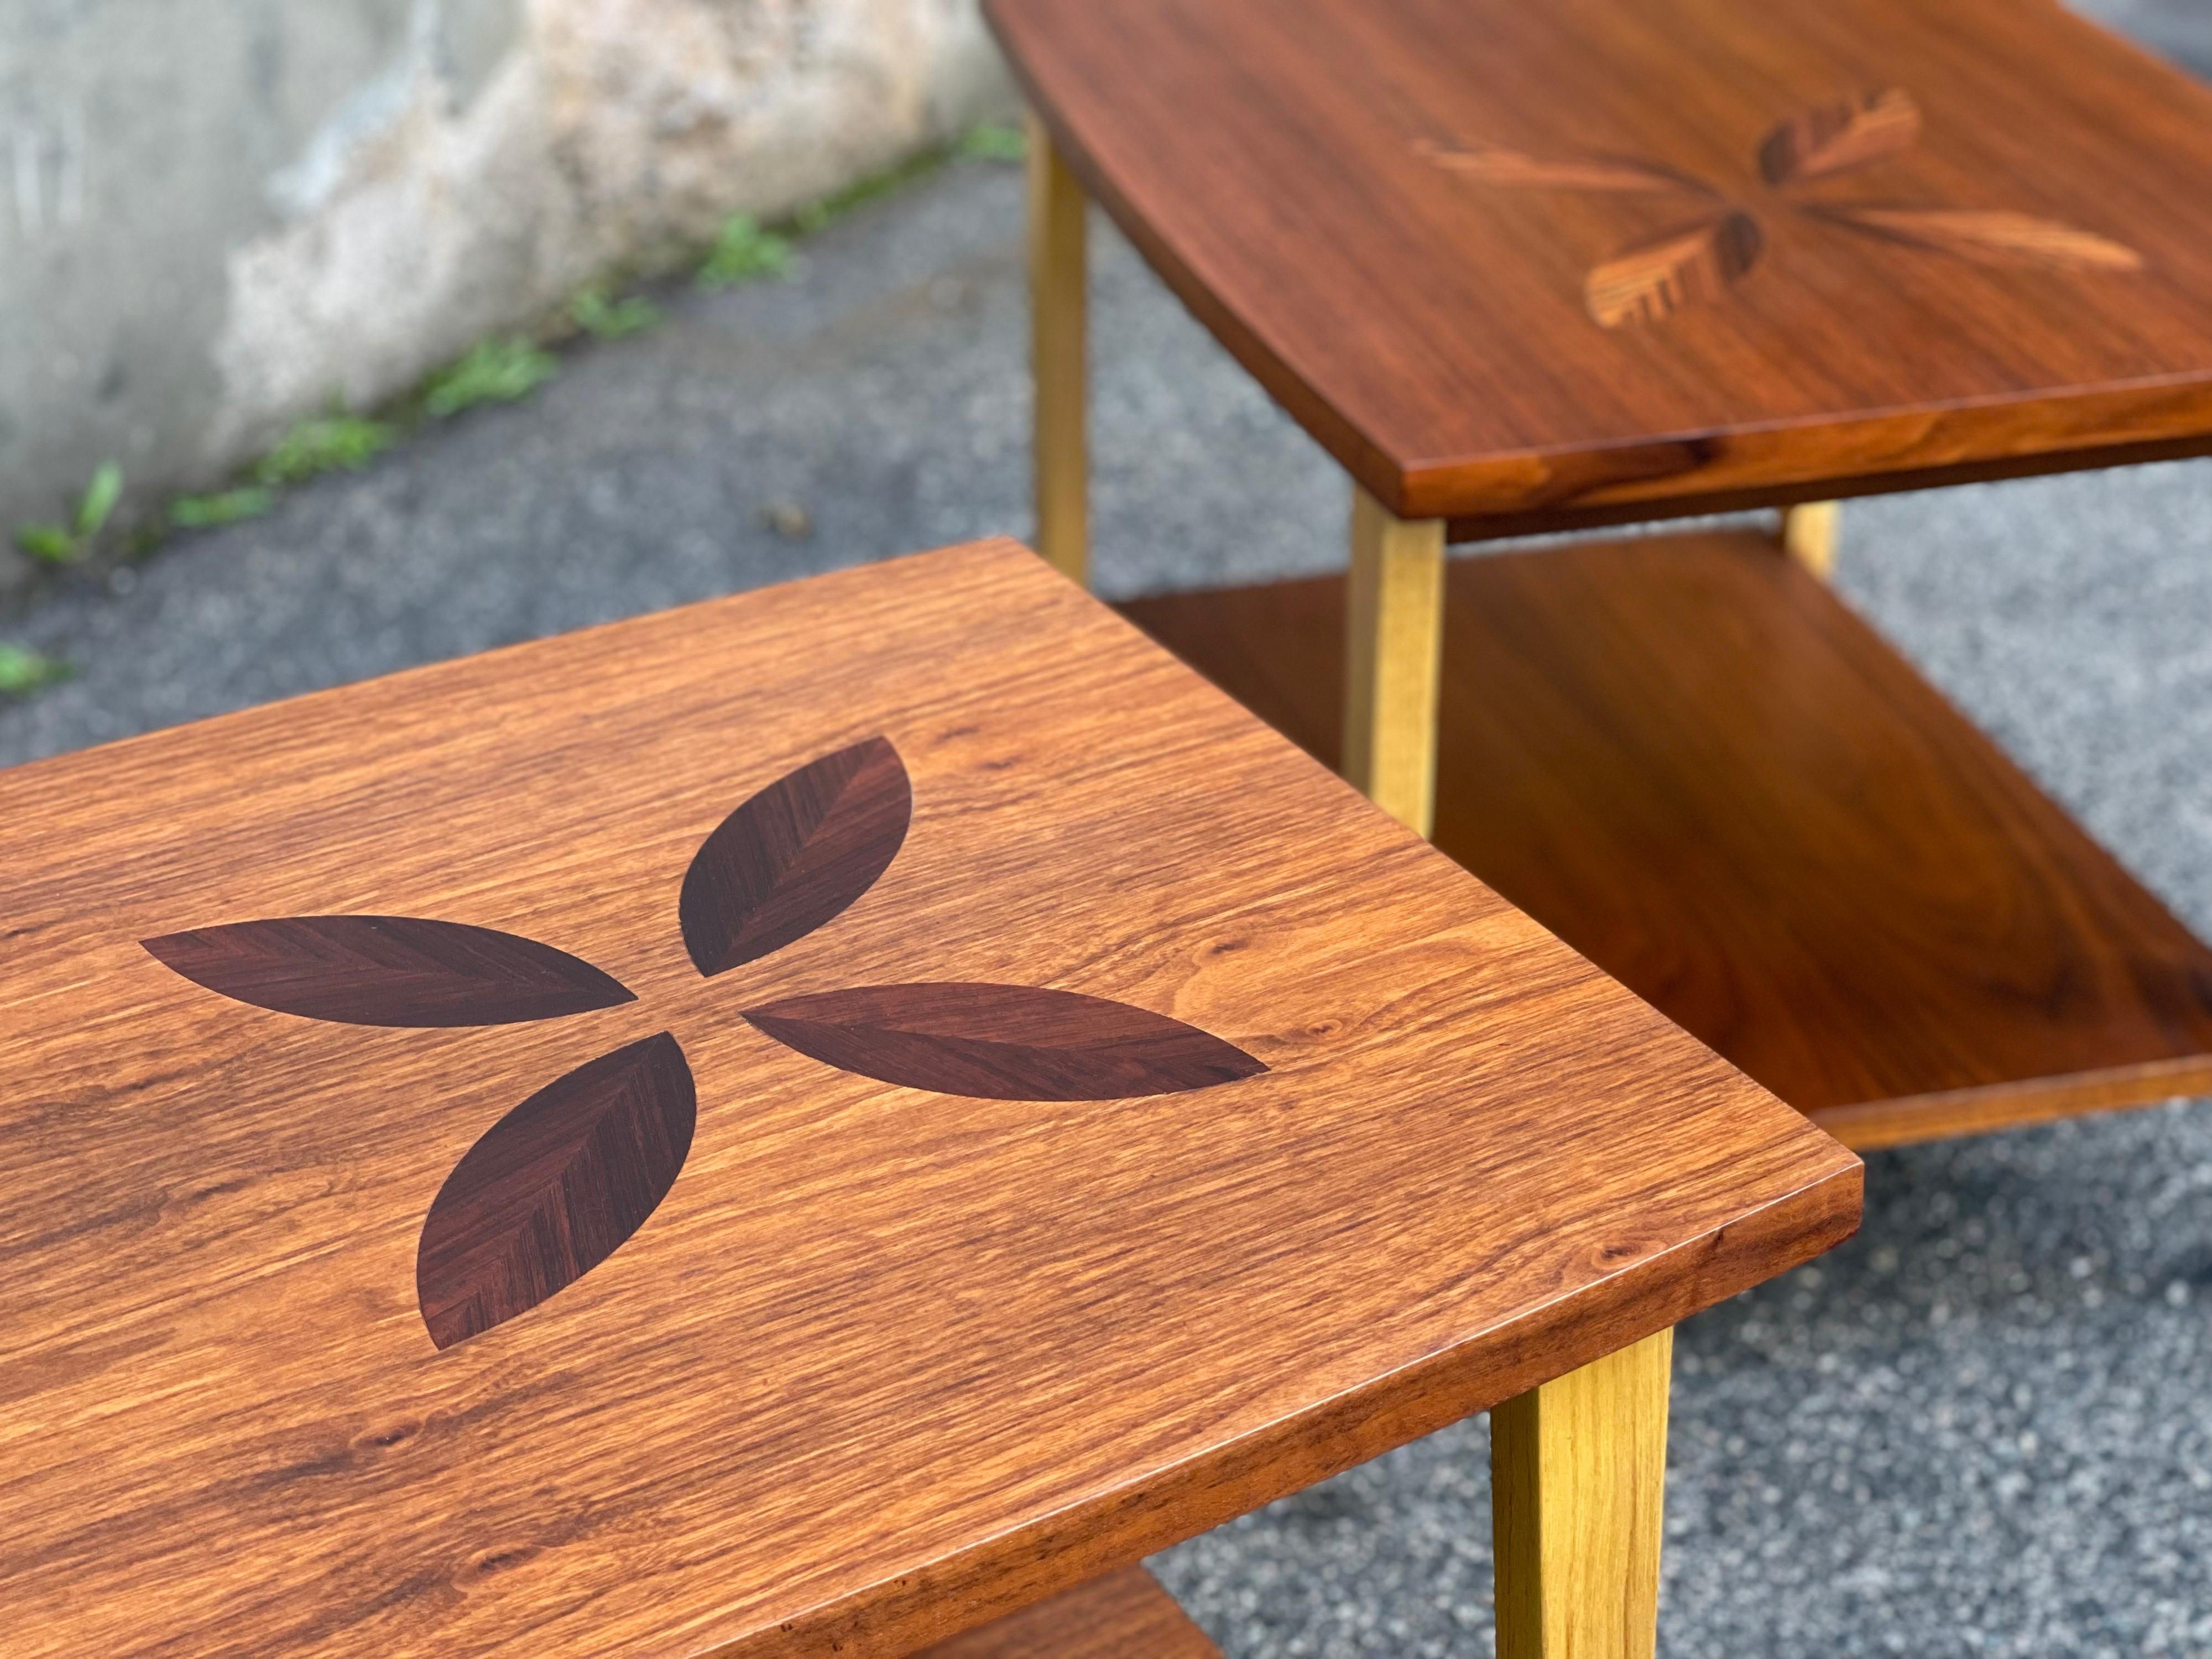 Excellent craftsmanship and construction on these hard-to-find Lane side or lamp tables from the 1960's, with gorgeous rosewood inlay over walnut. The legs are ash with rosewood dowels. Lovely contrasting materials with a flared edge at the back to